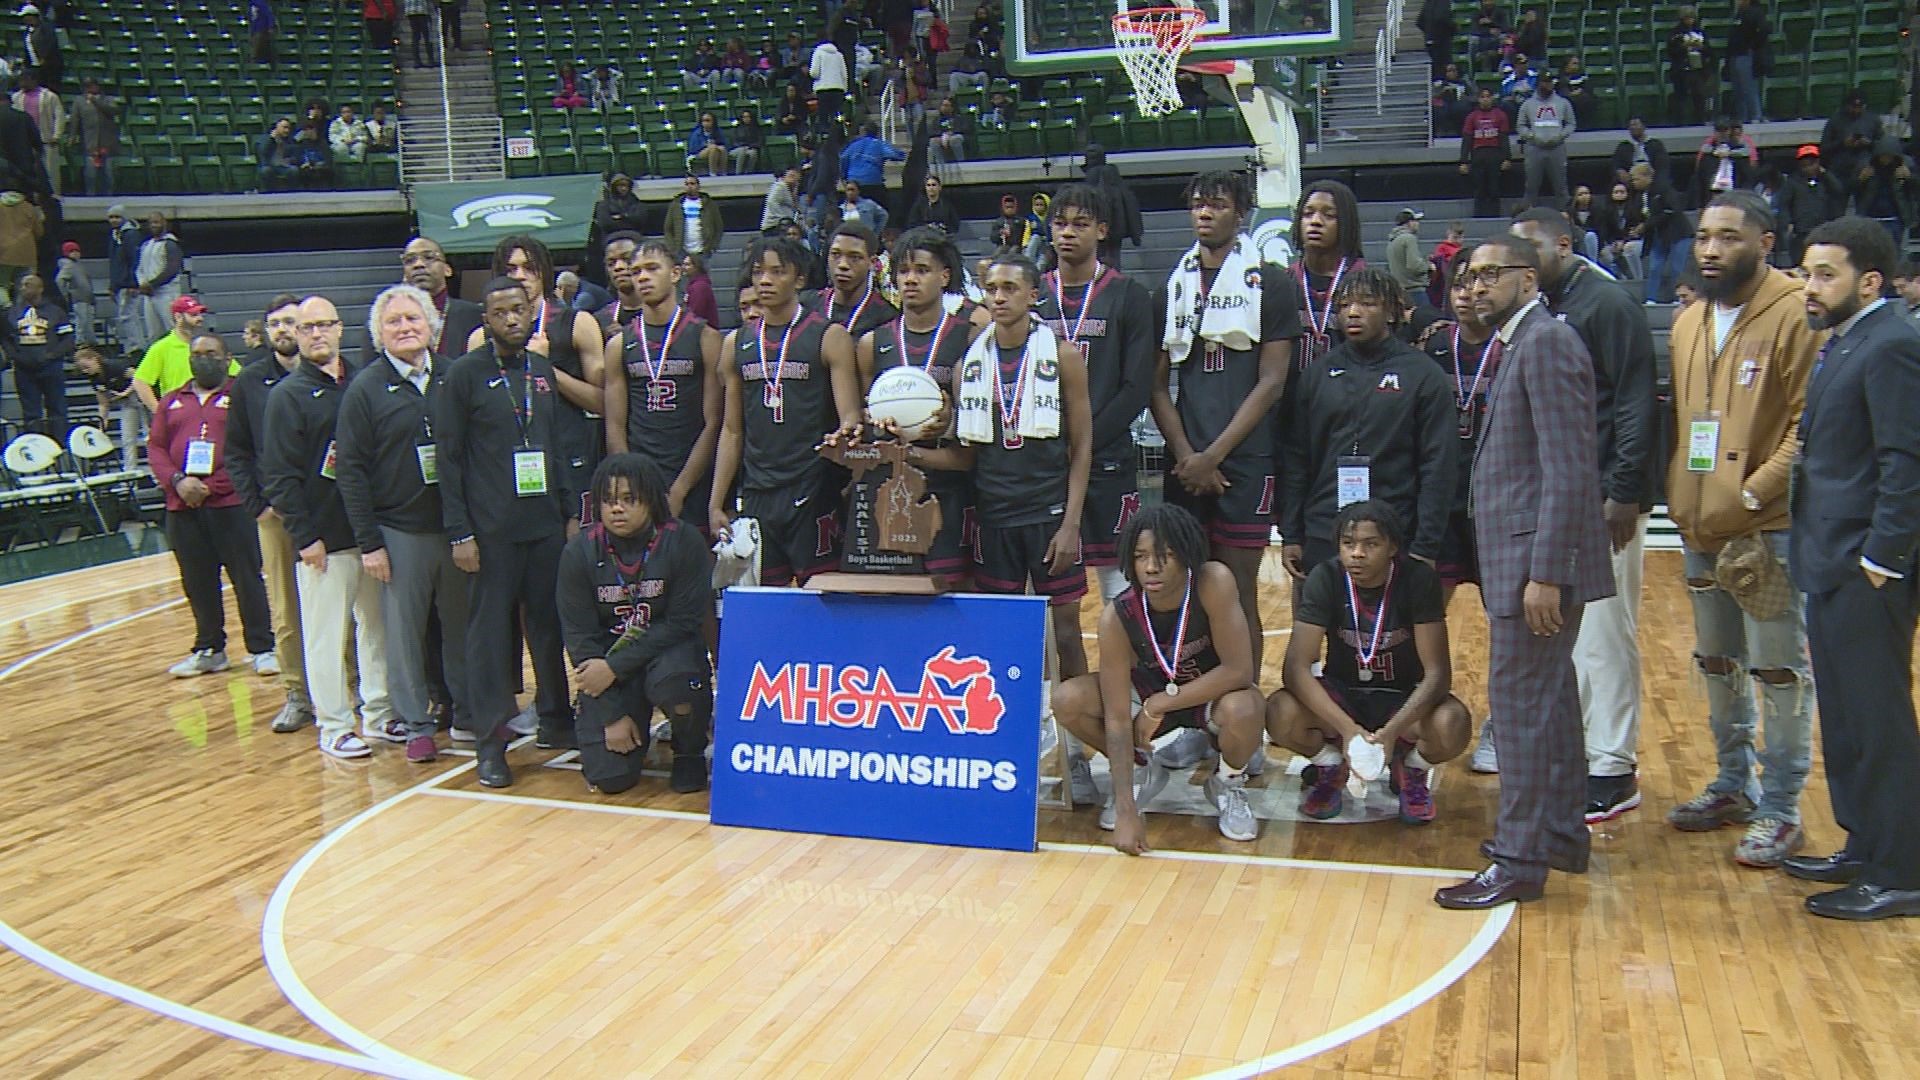 Muskegon made its first trip back to the state championship for the first time since the Big Reds won it all in 2014.